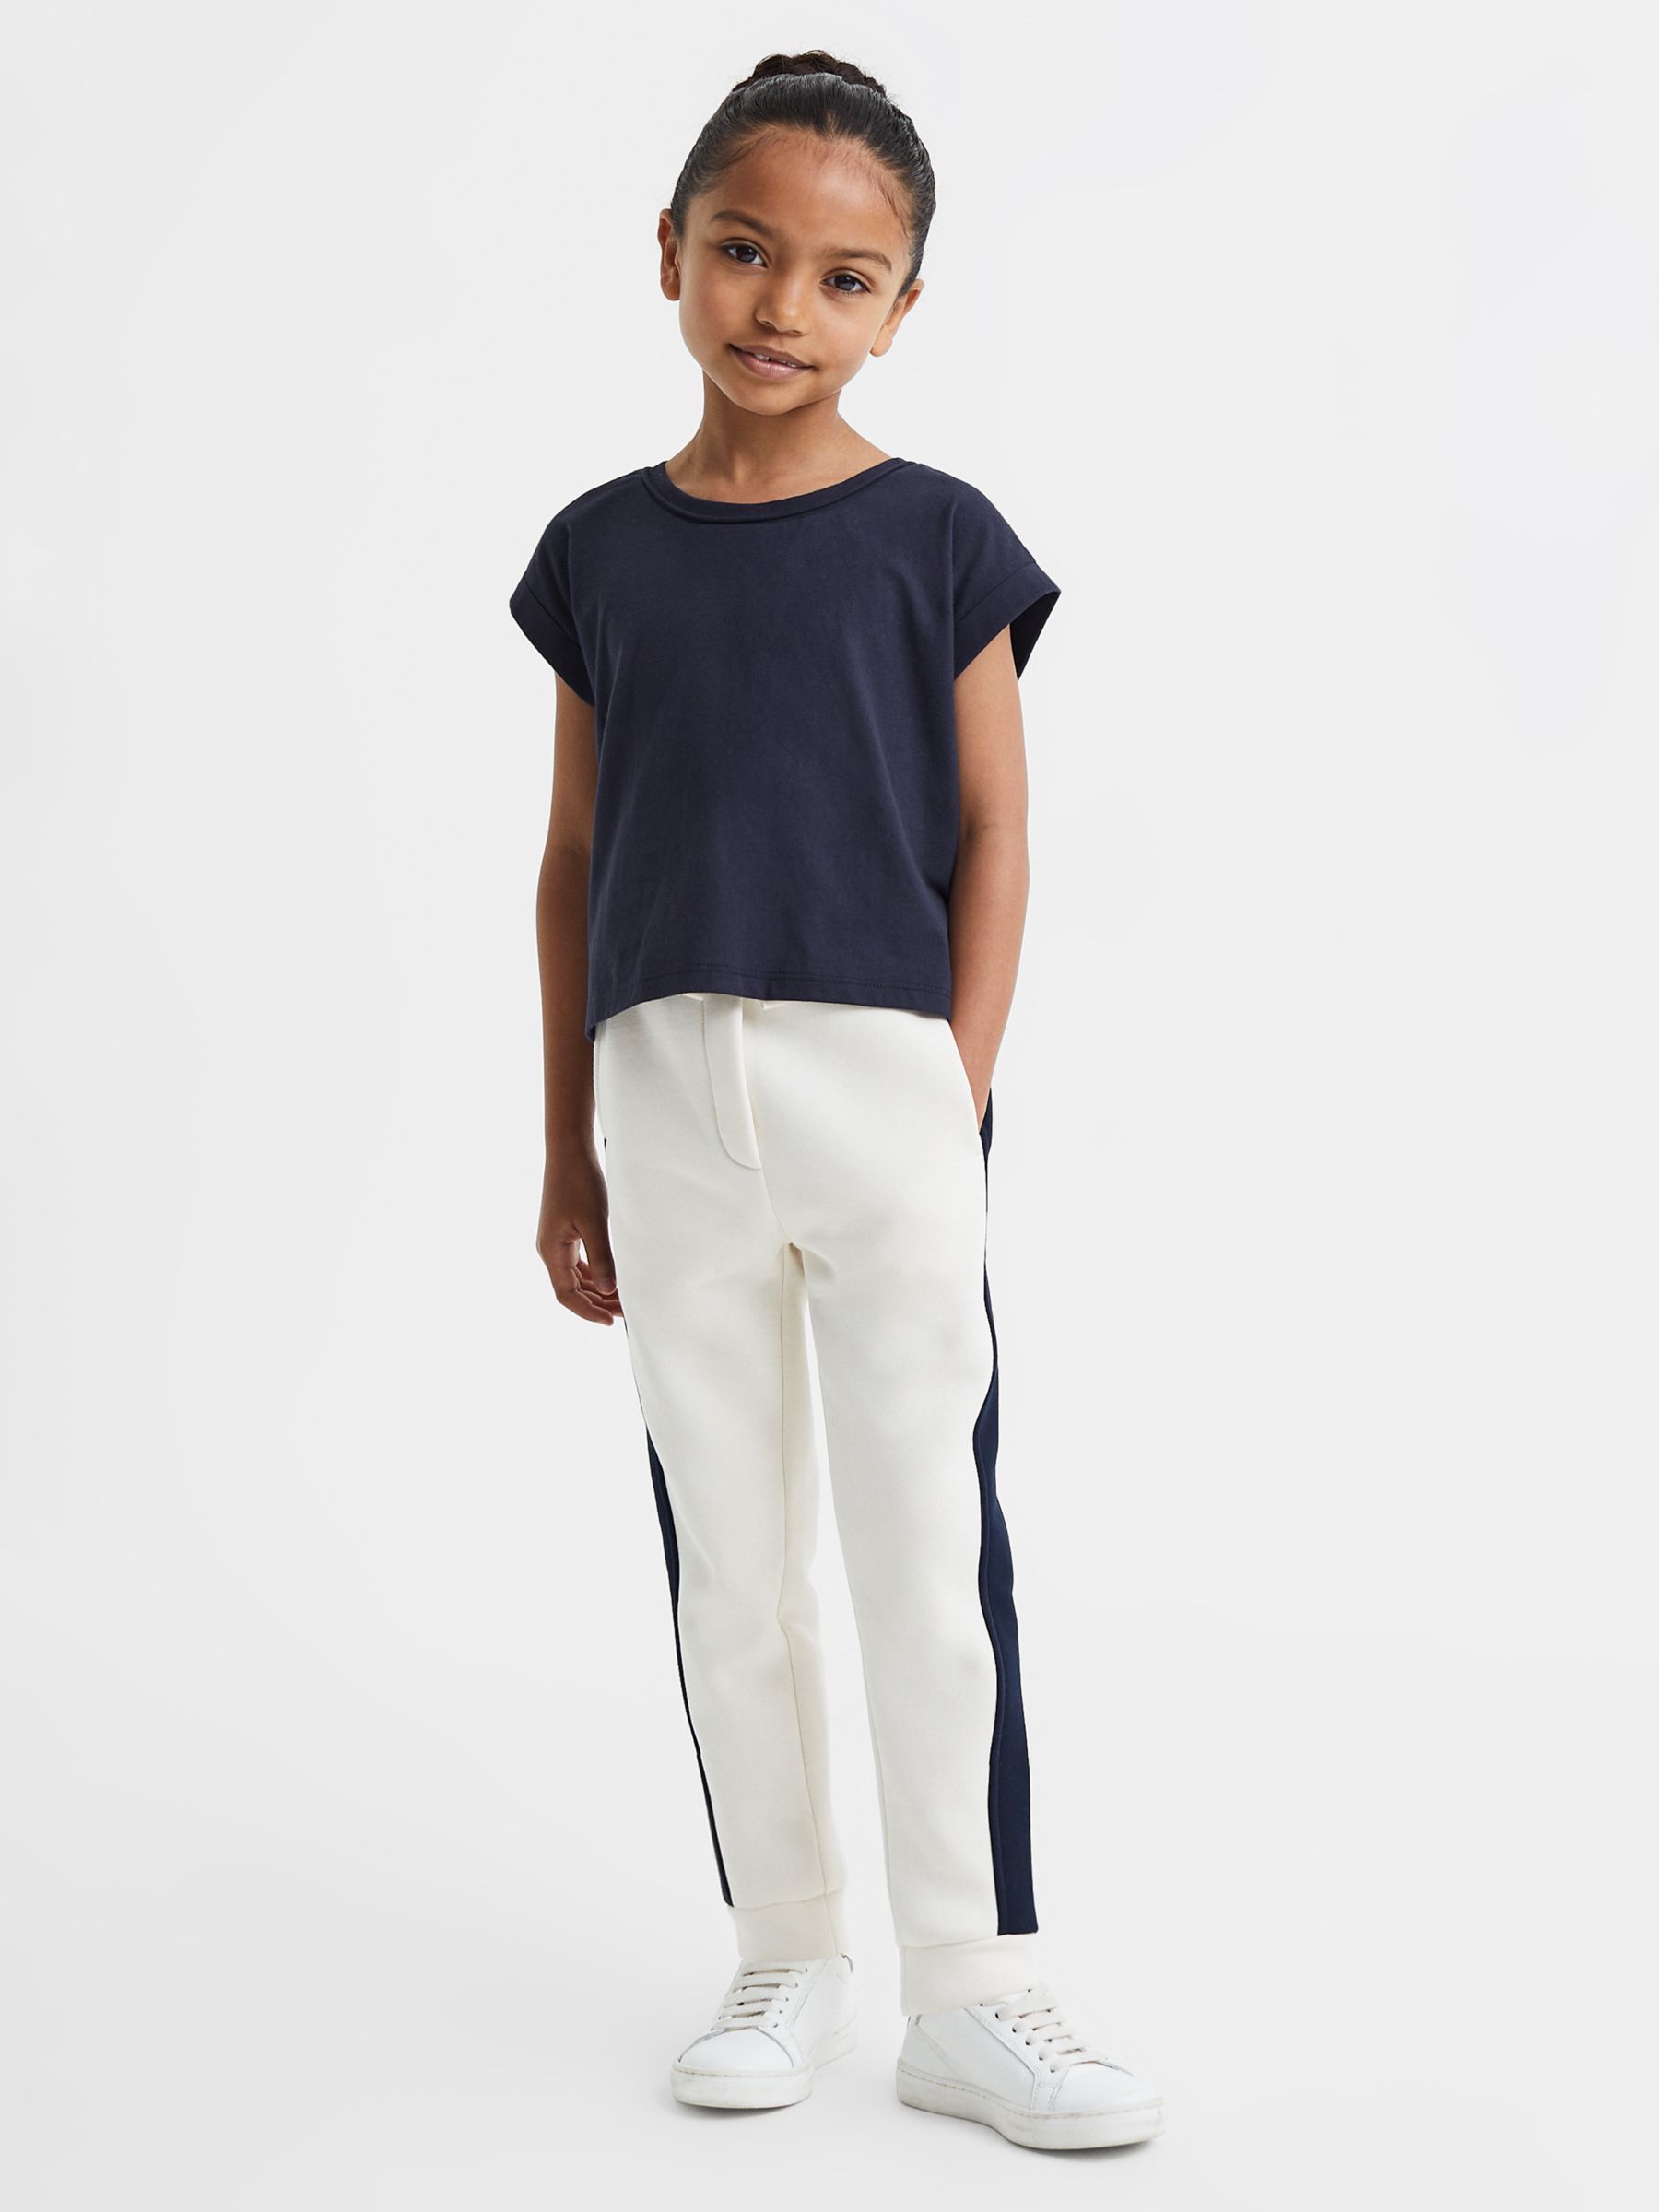 Buy Reiss Kids' Terry Cropped T-Shirt, Navy Online at johnlewis.com